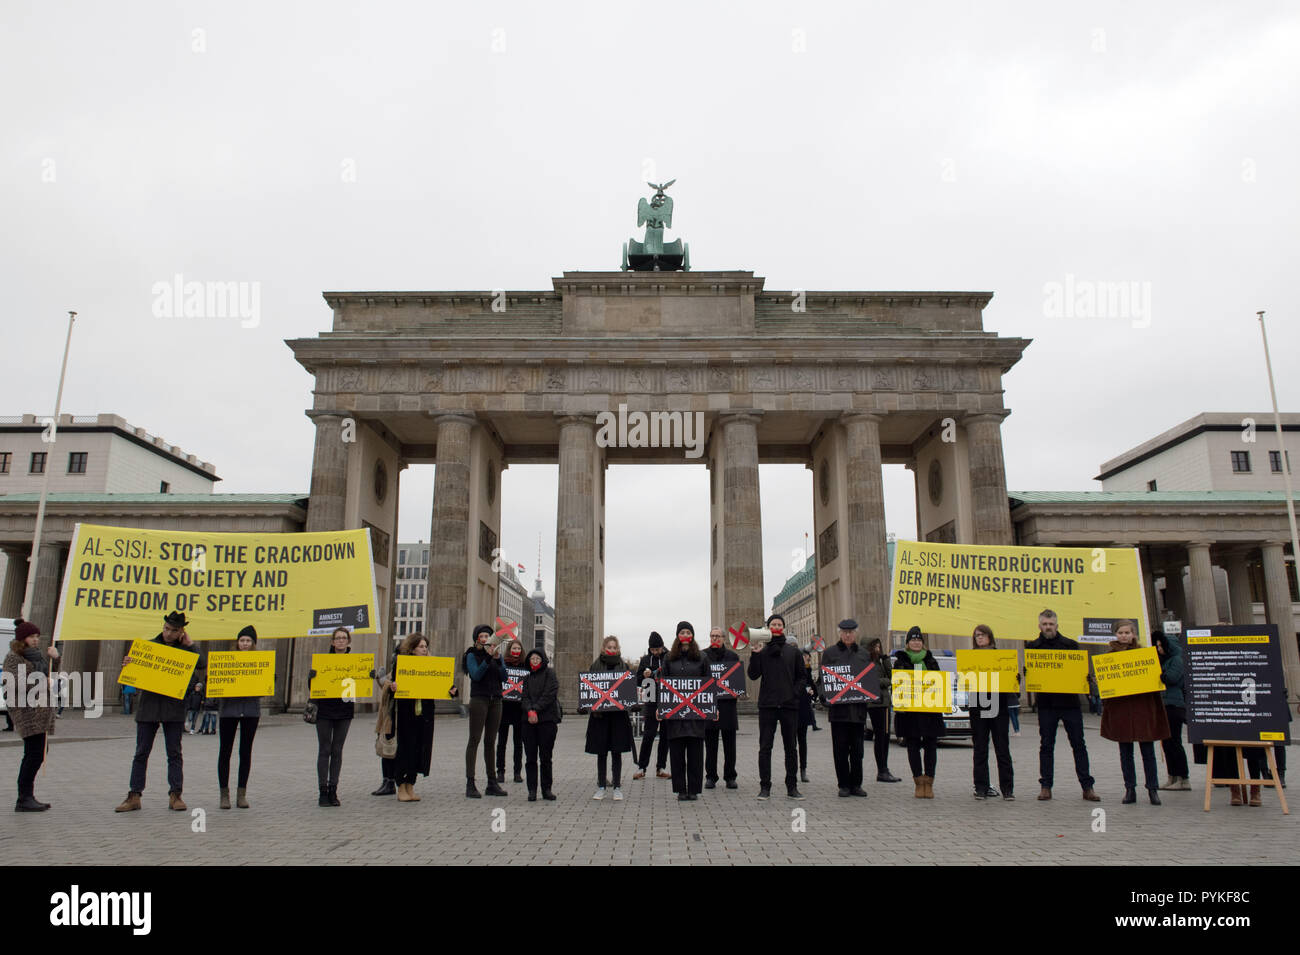 Berlin, Germany. 29th Oct, 2018. Amnesty International activists protest on the sidelines of the Egyptian President's visit to the Brandenburg Gate against human rights violations in Egypt and for freedom of expression in the country in North Africa. Credit: Paul Zinken/dpa/Alamy Live News Stock Photo